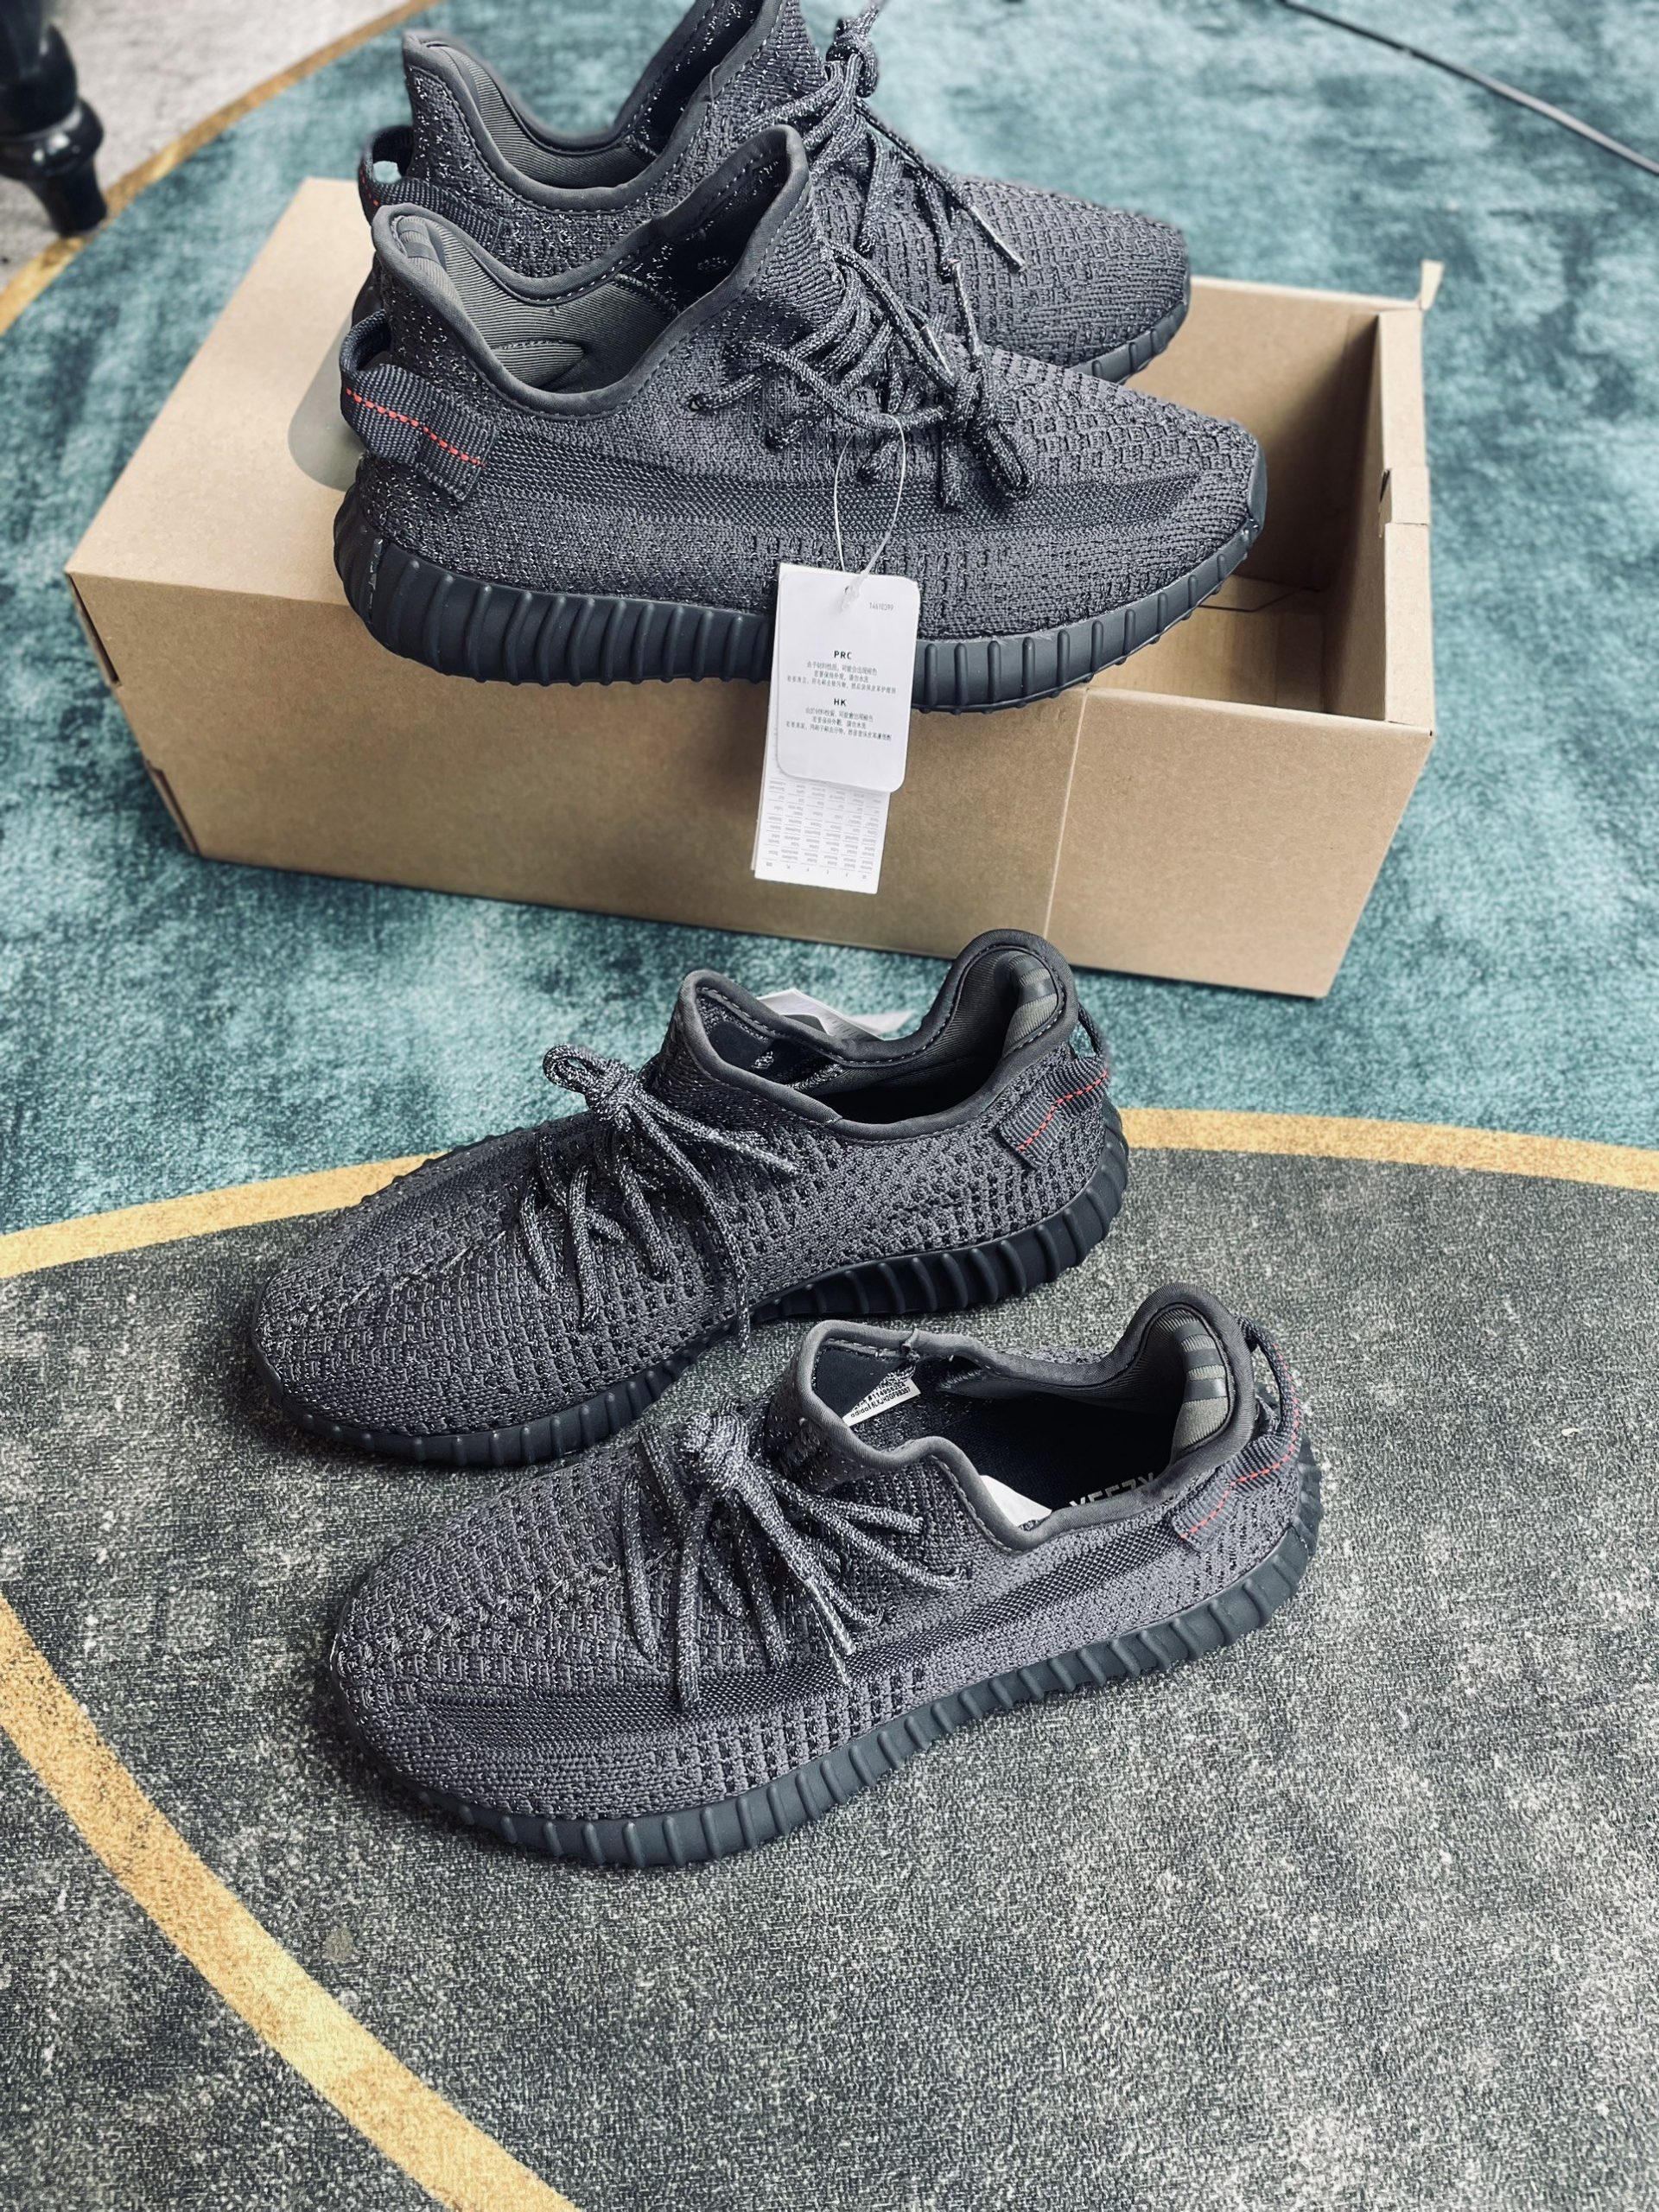 giay adidas yeezy boost 350 v2 static black rep 11 10 scaled